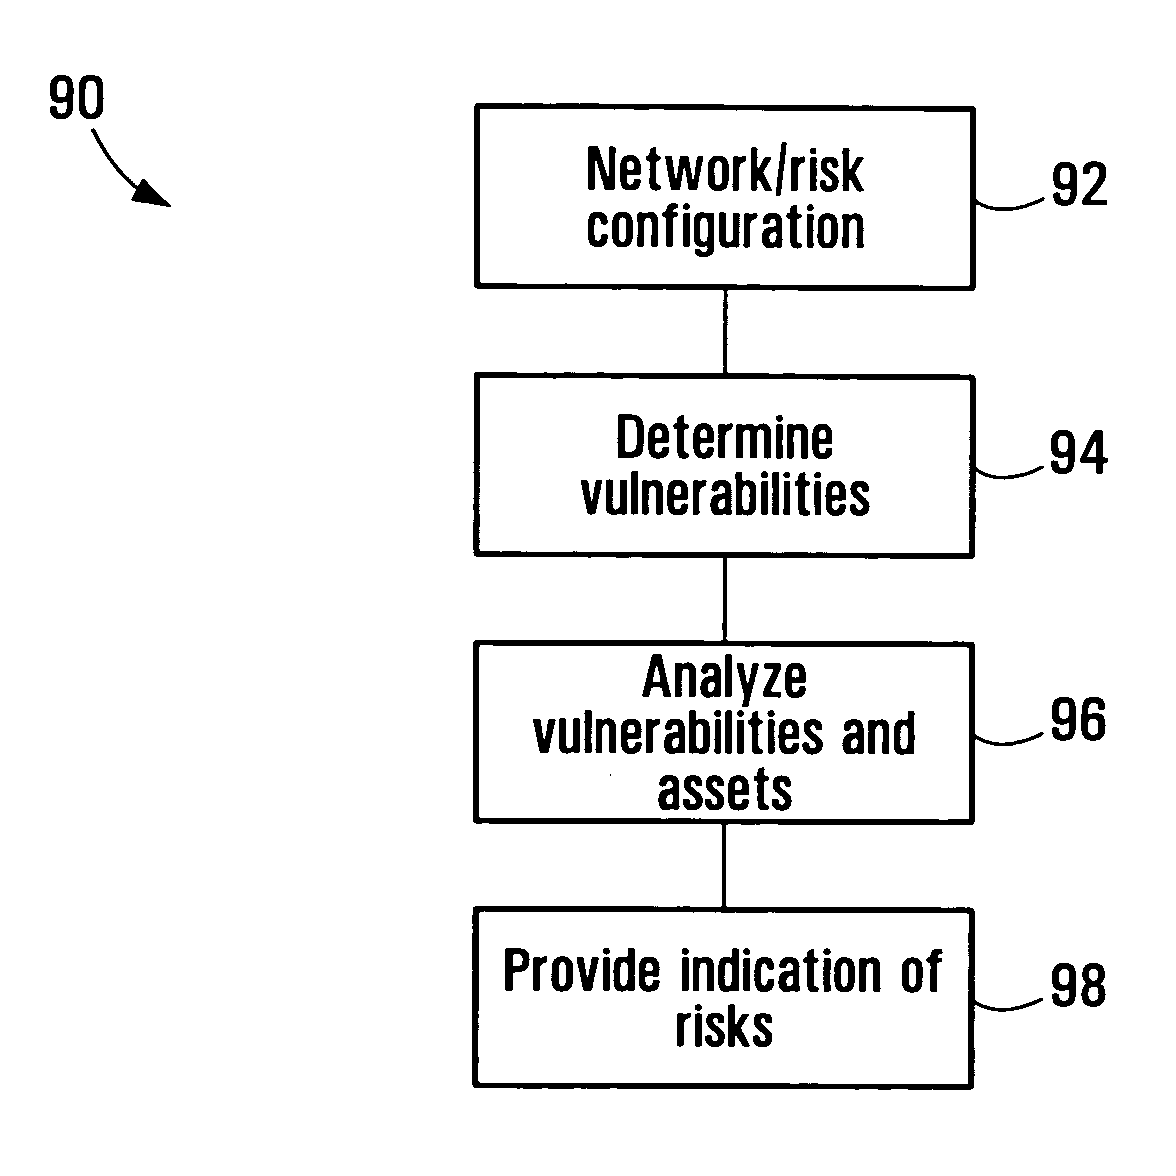 Systems and methods of associating security vulnerabilities and assets